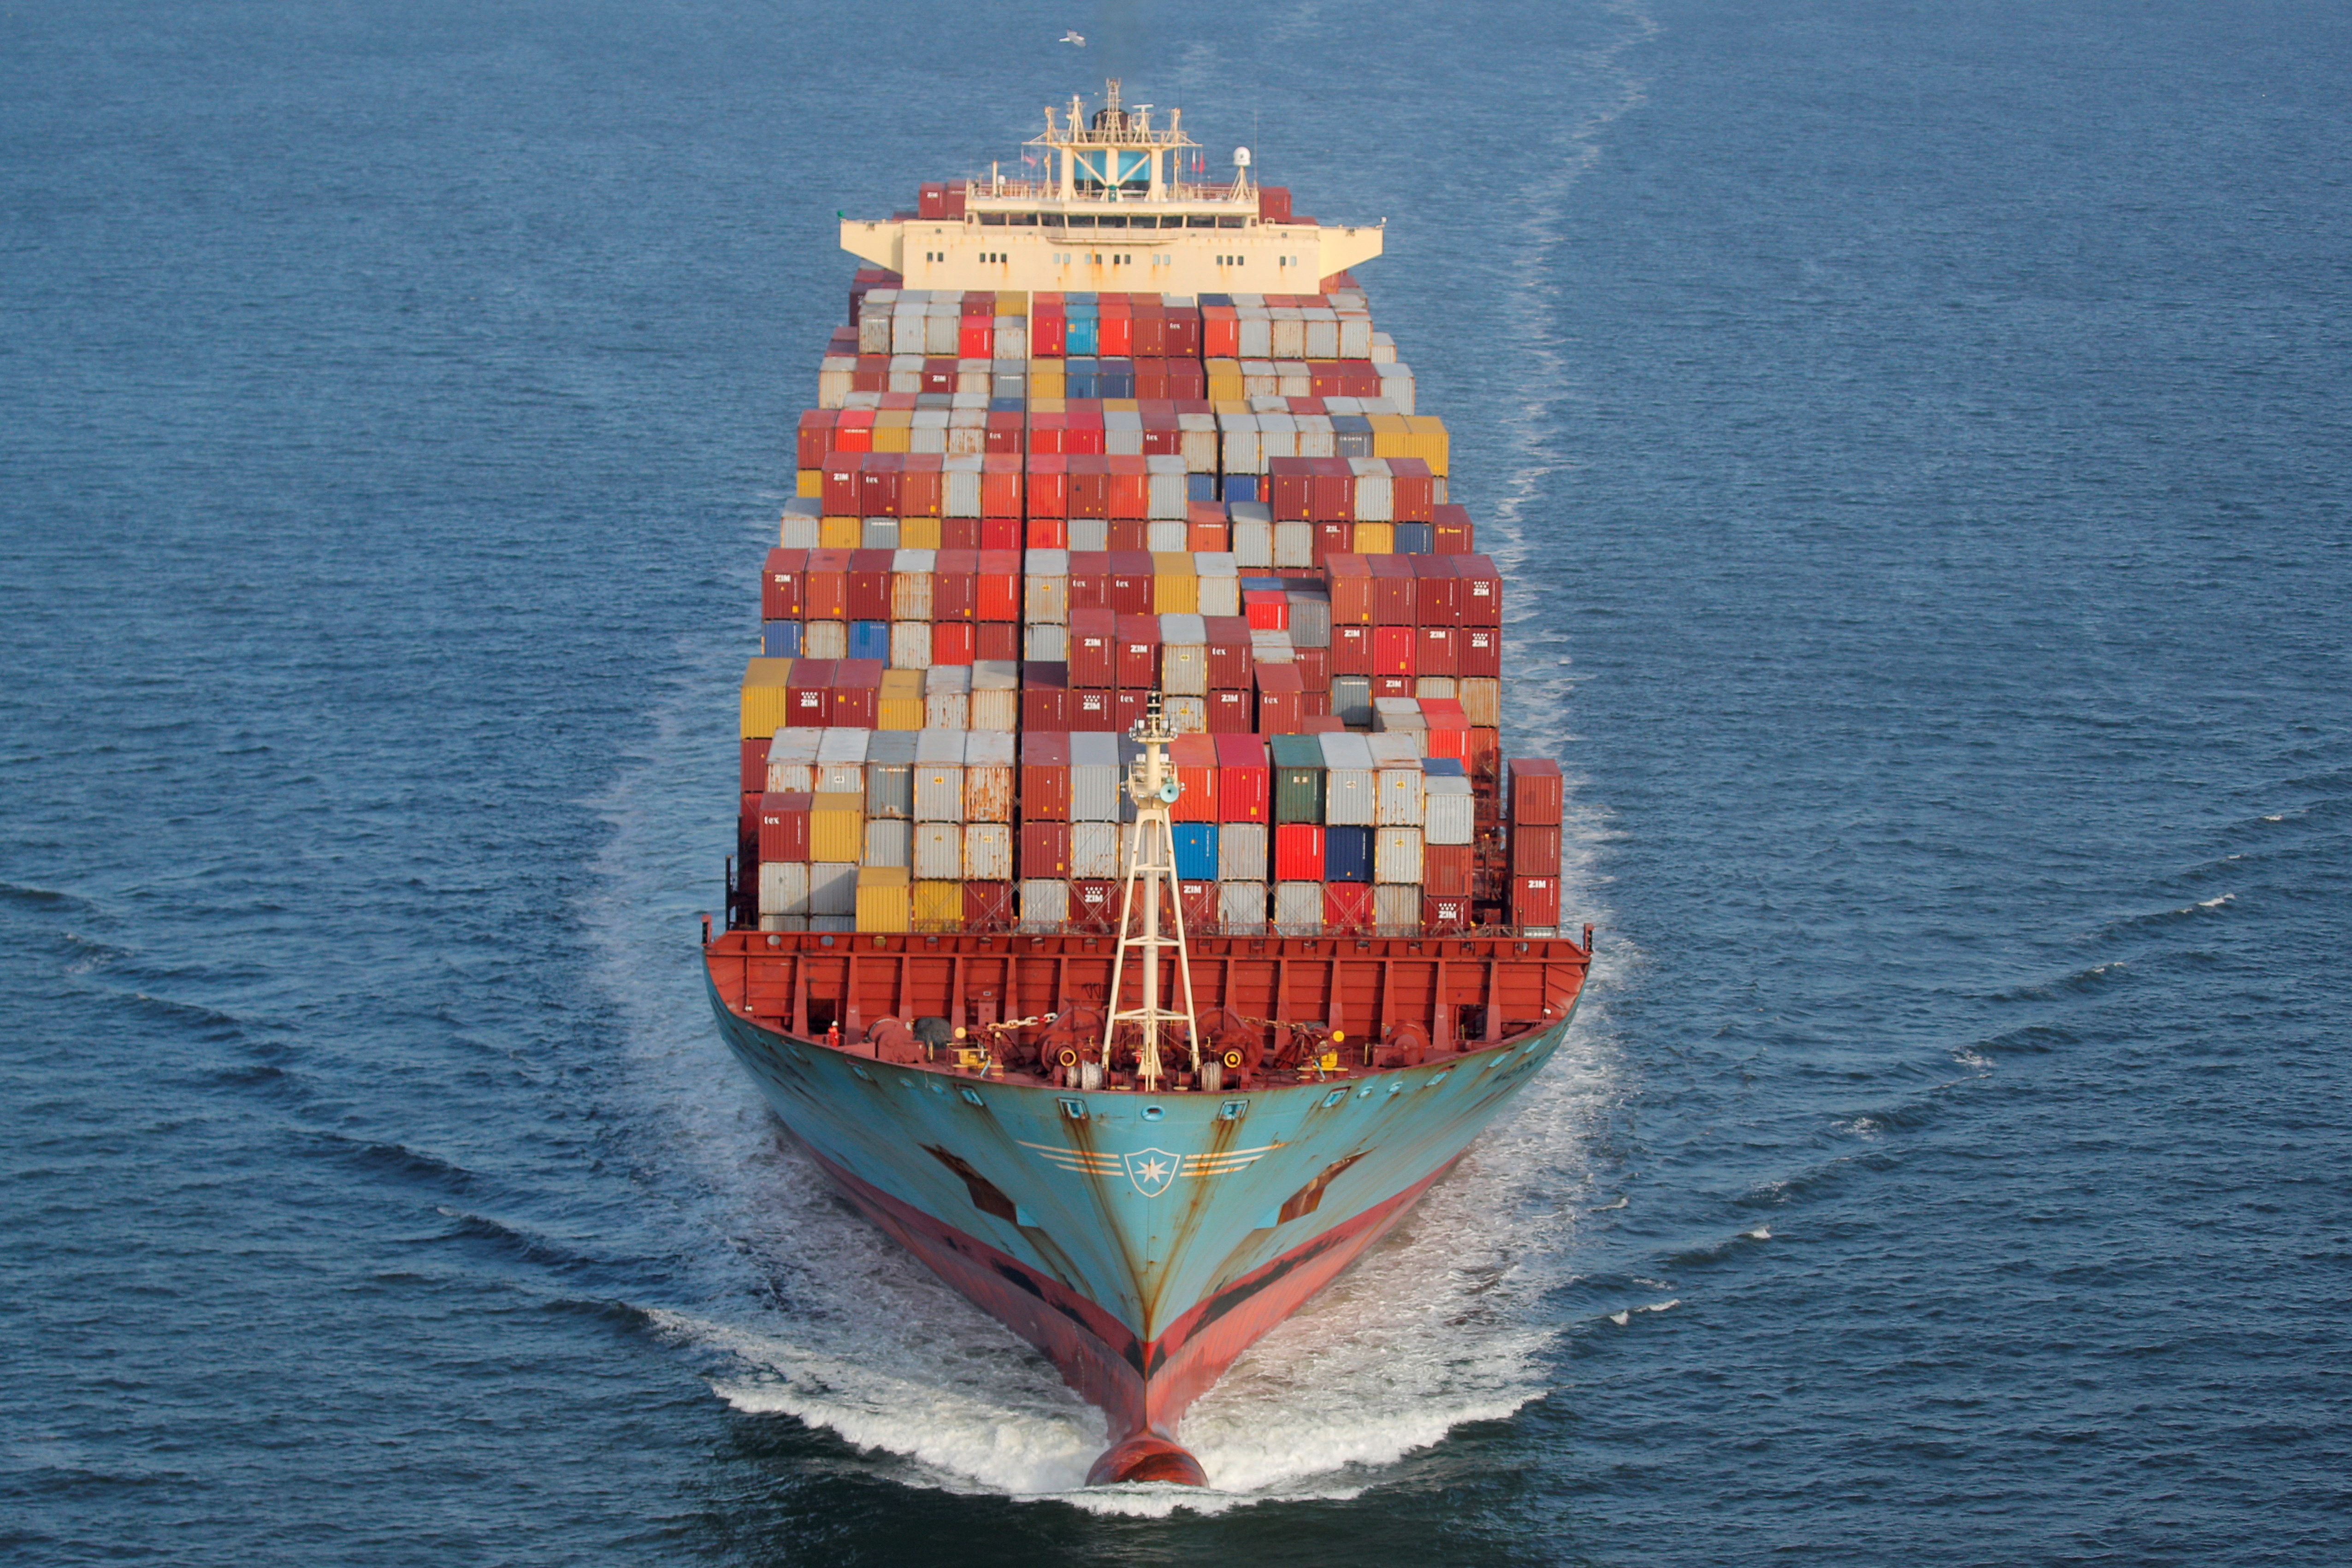 Containers are stacked on the deck of the cargo ship as it's underway in New York Harbor in New York